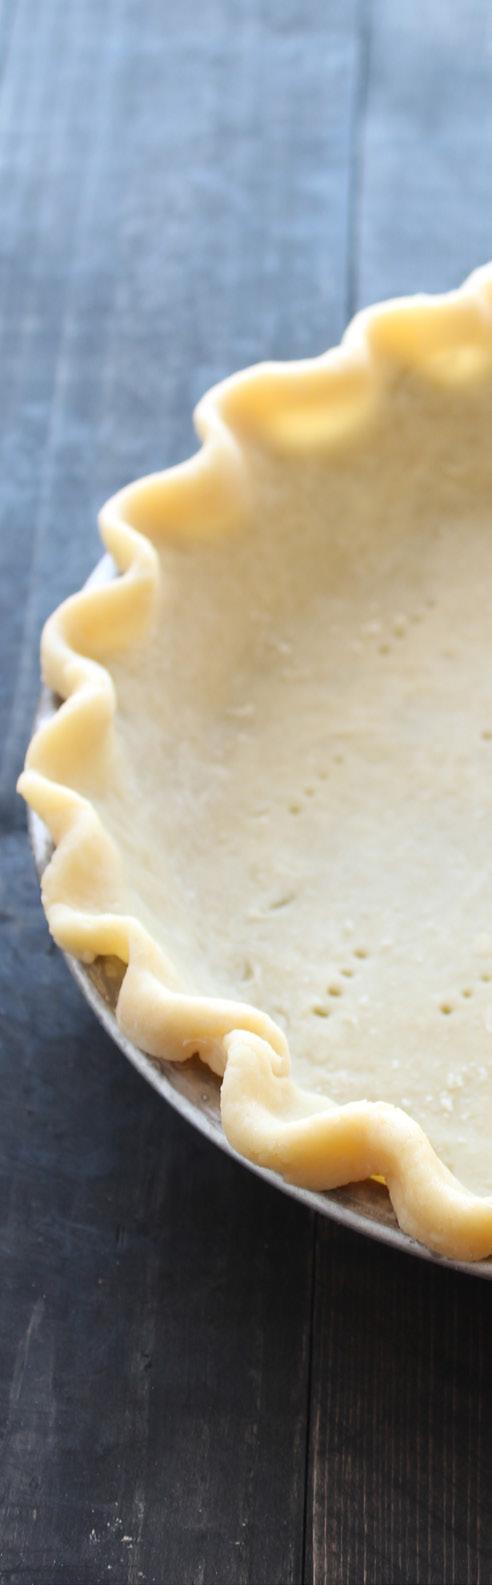 Pies - Pie Dough Pastry dough can be shaped into a disc and refrigerated for up to 3 days, as long as it s well wrapped in plastic. Unbaked pie shells can also be refrigerated for up to 3 days.